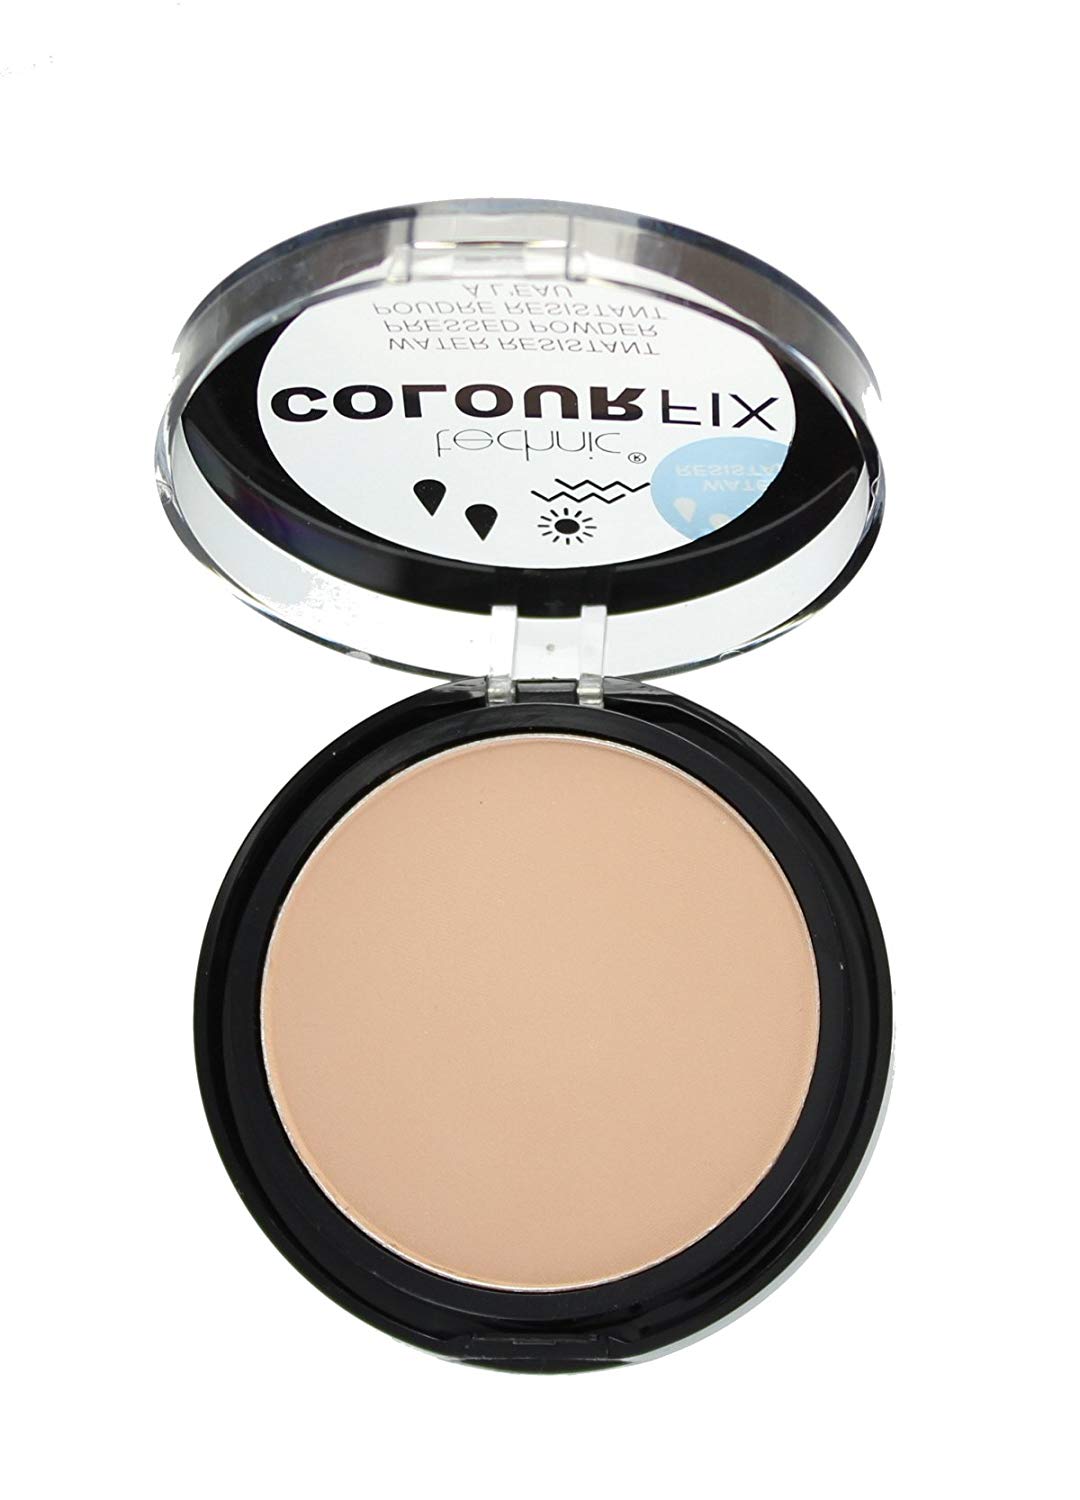 Technic Color Fix Water Resistant Pressed Powder Shade Almond